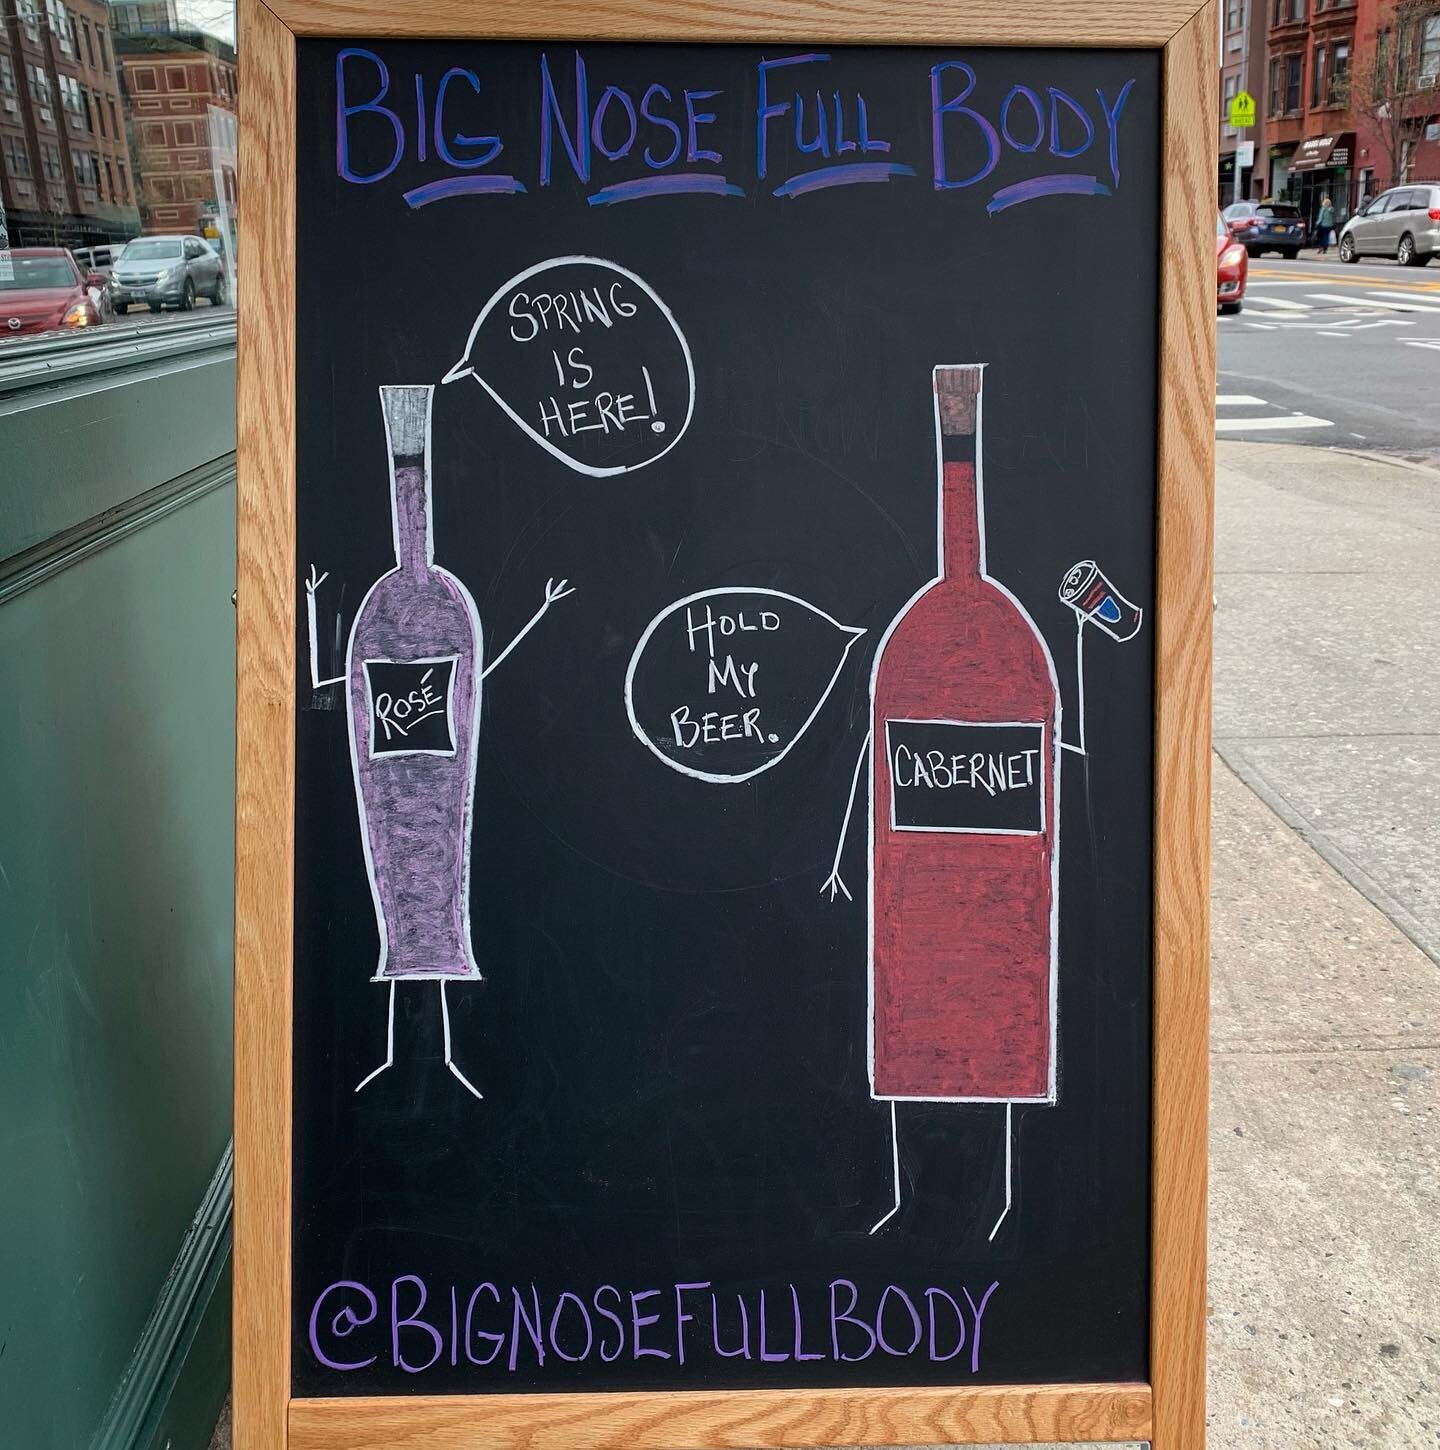 It&rsquo;s cold out there but we&rsquo;ve got you covered no matter what you&rsquo;re in the mood for. 

#bignosefullbody #brooklynwine #parkslopewine